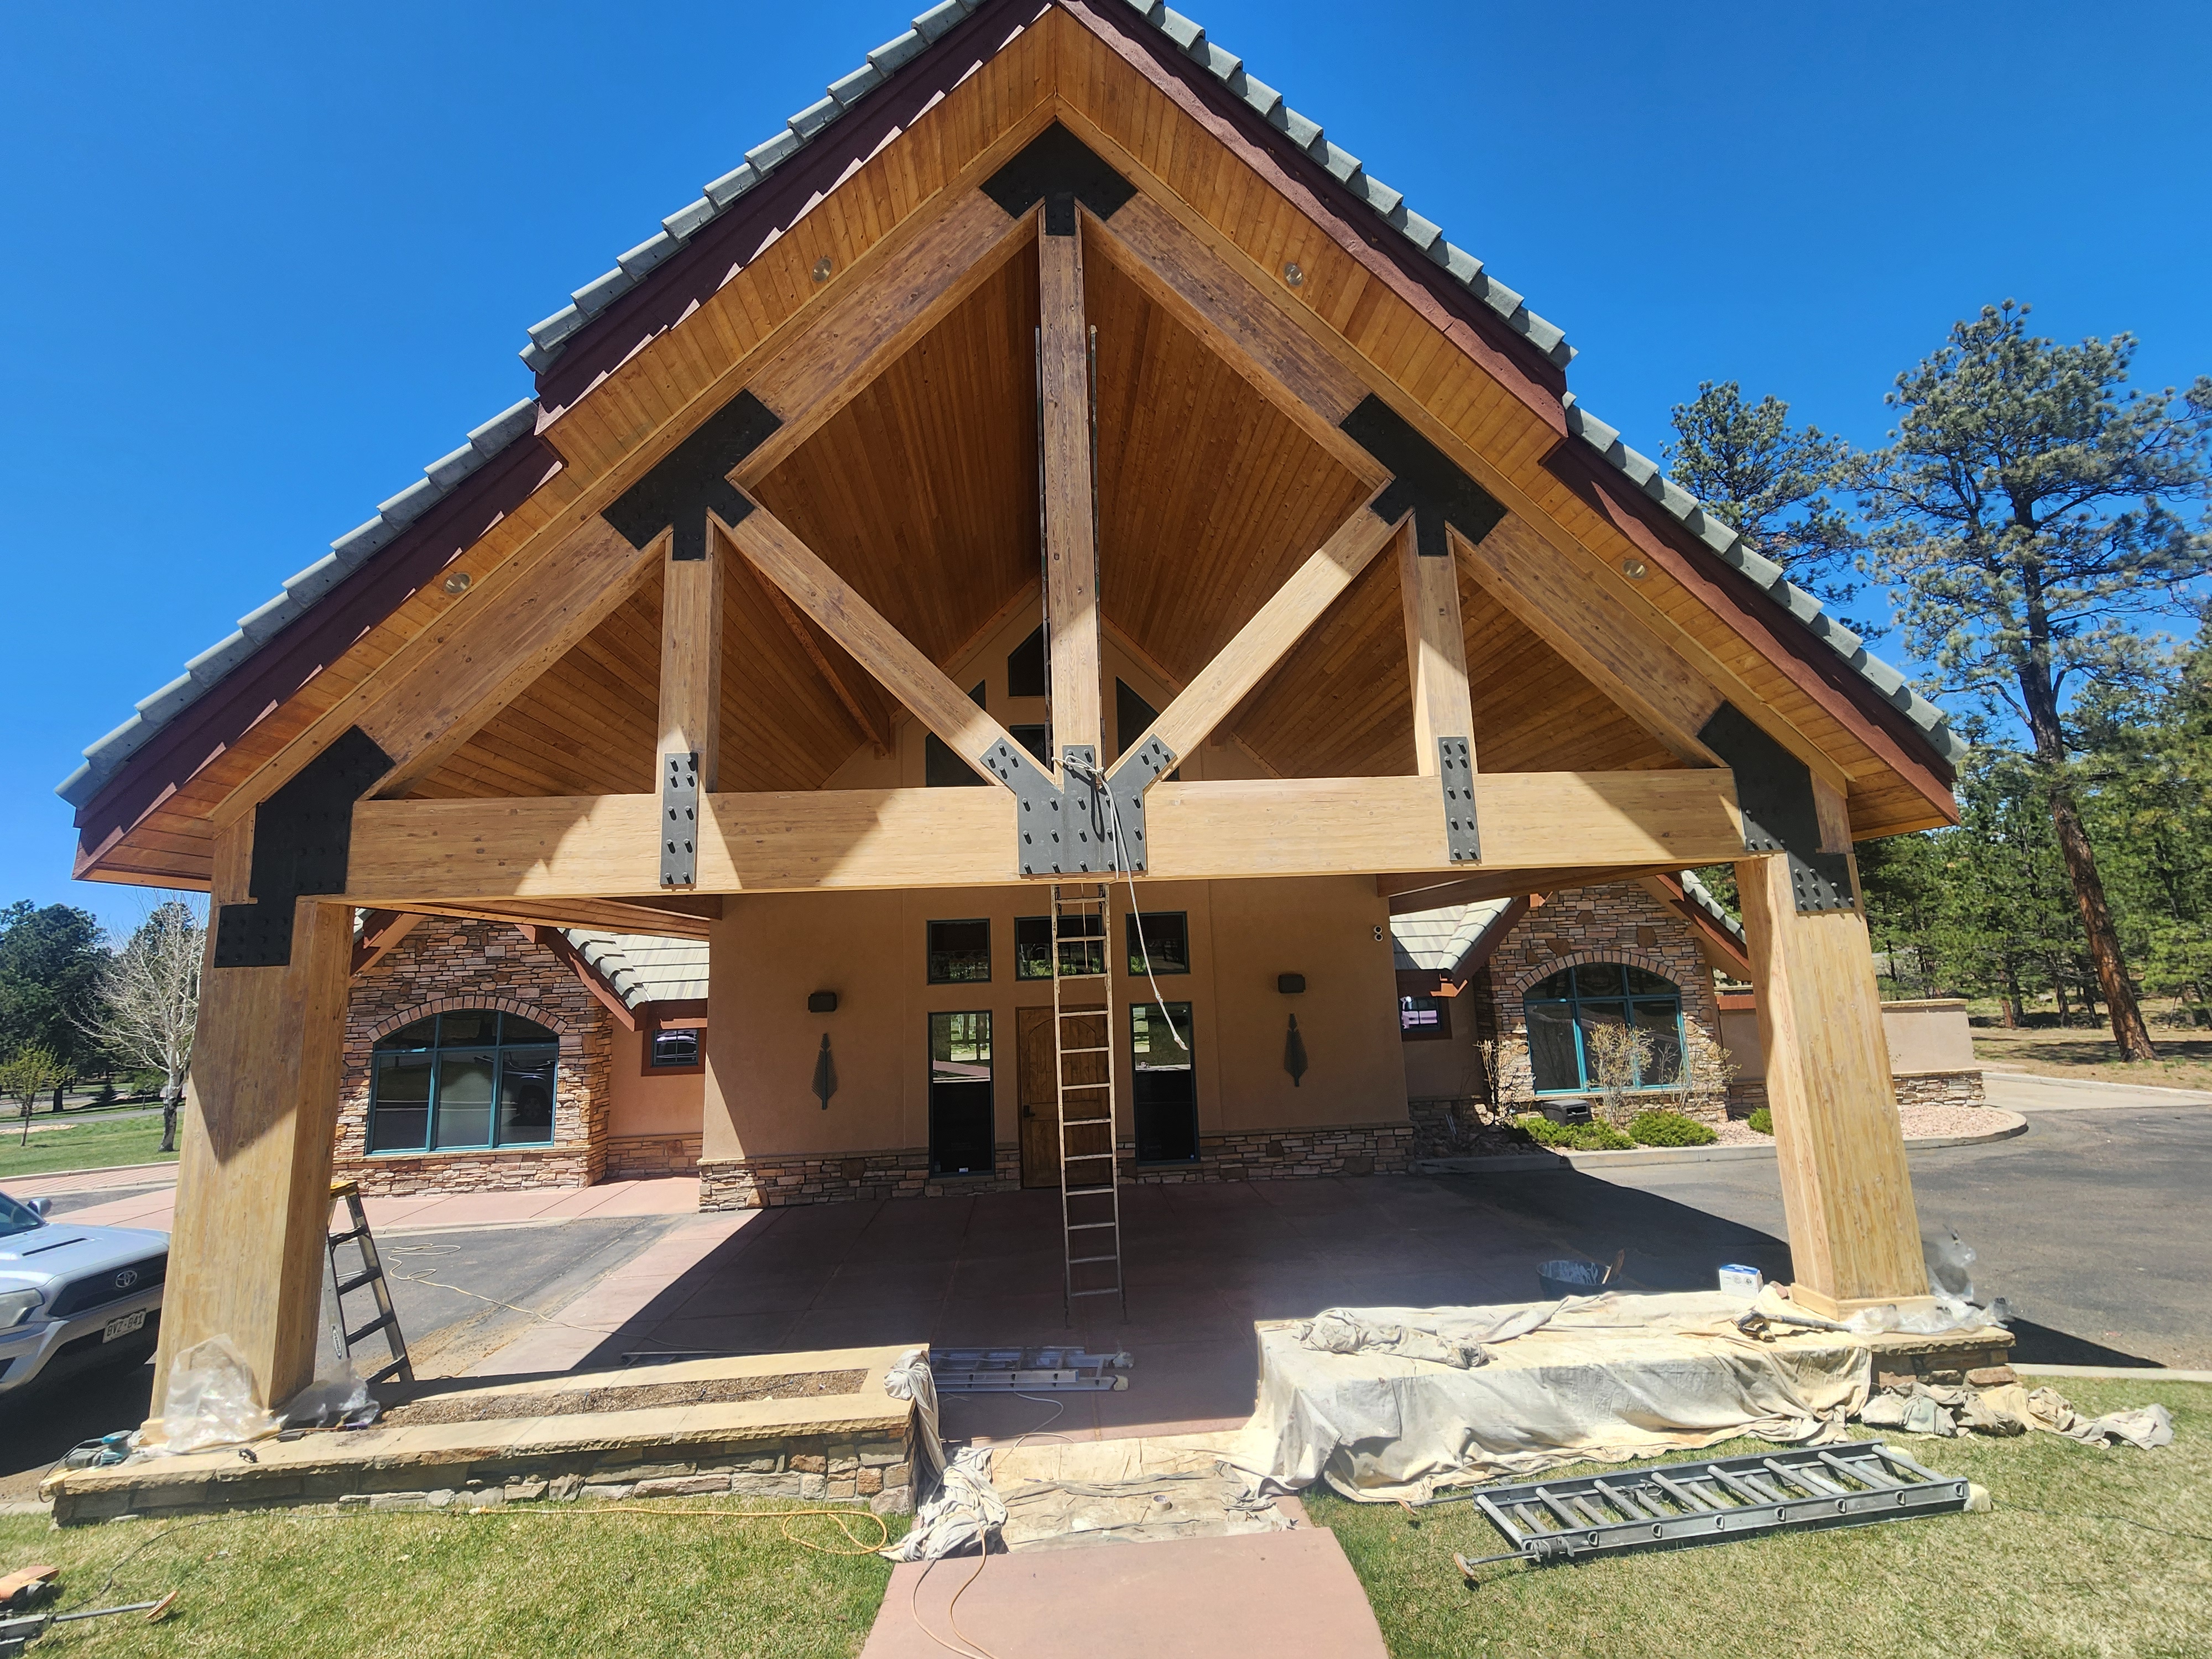 Lodge exterior varnish. Image of A-frame wood exterior awning being varnished. Blue skies and green trees.